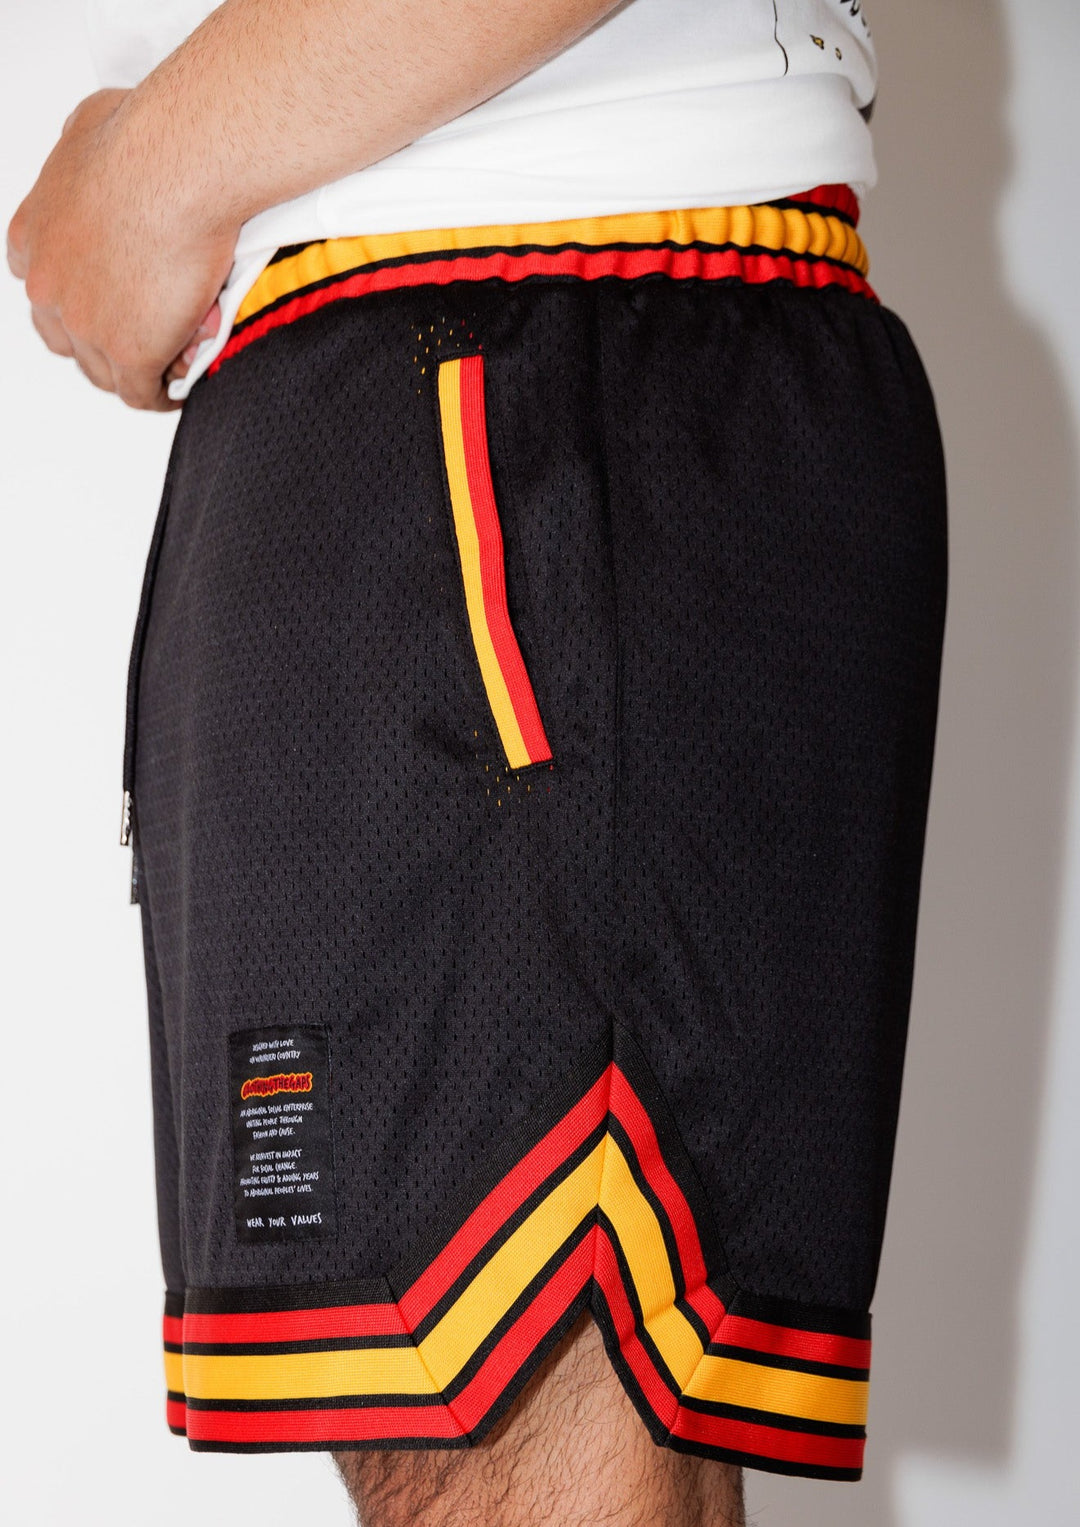 Clothing The Gaps. Blak Basketball Shorts. Retro look with red, black and yellow stripes around bottom of shorts, on pocket opening and around waist band. Rest of the shorts are a black mesh material. Has a elastic waist, black drawstrings, deep pockets and clothing the gaps patch on corner of left leg.